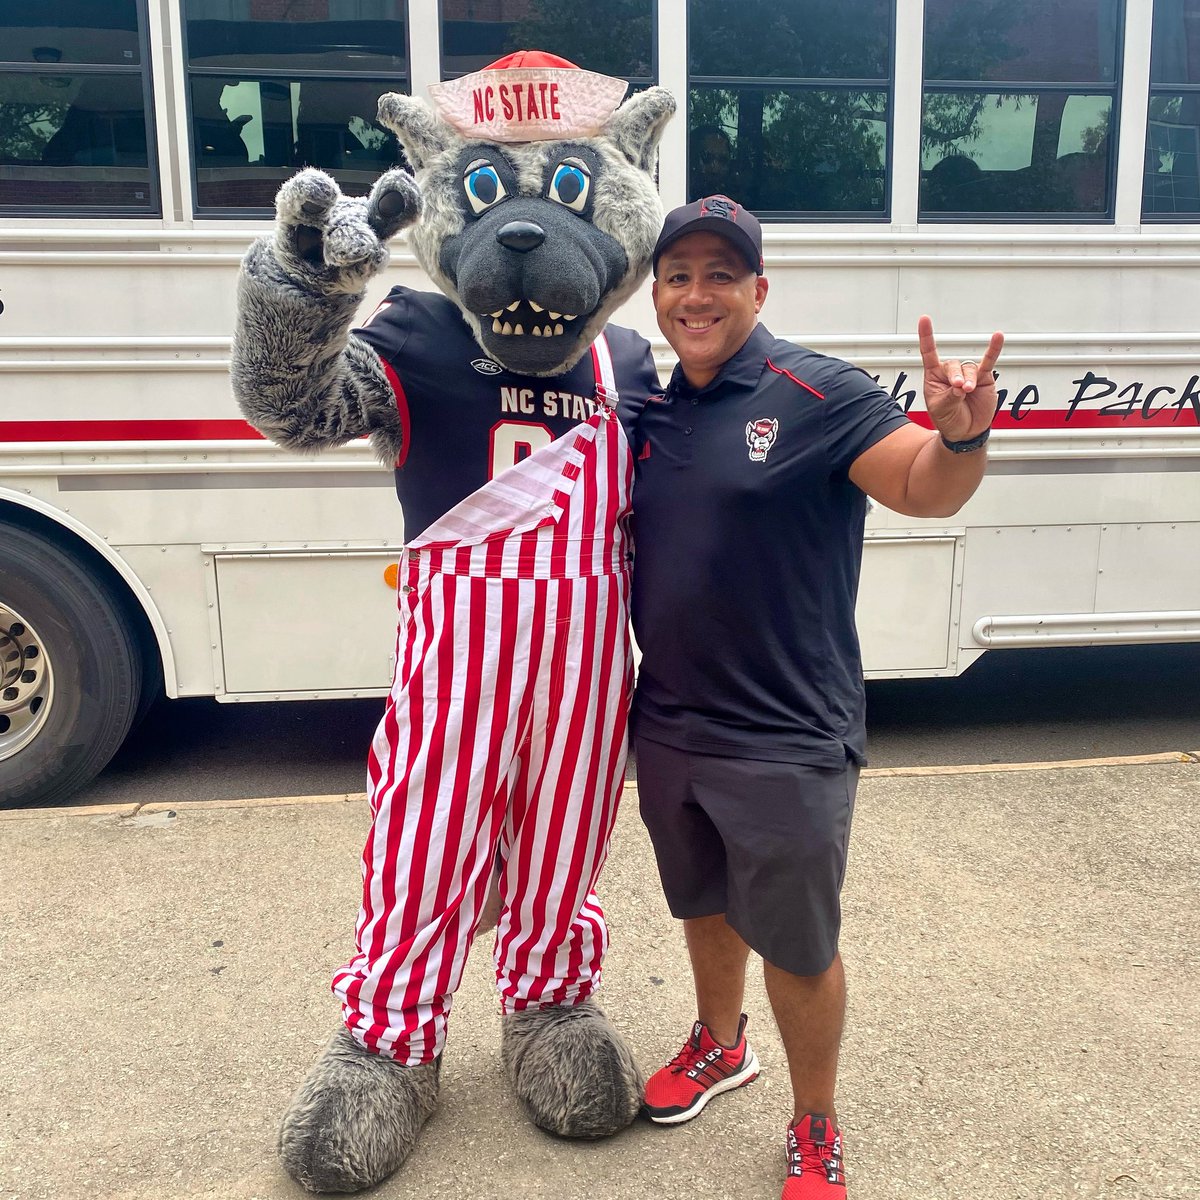 Mr Wuf and Our Leader of the Pack‼️ #Hdawg | @NCSUCheerCoach